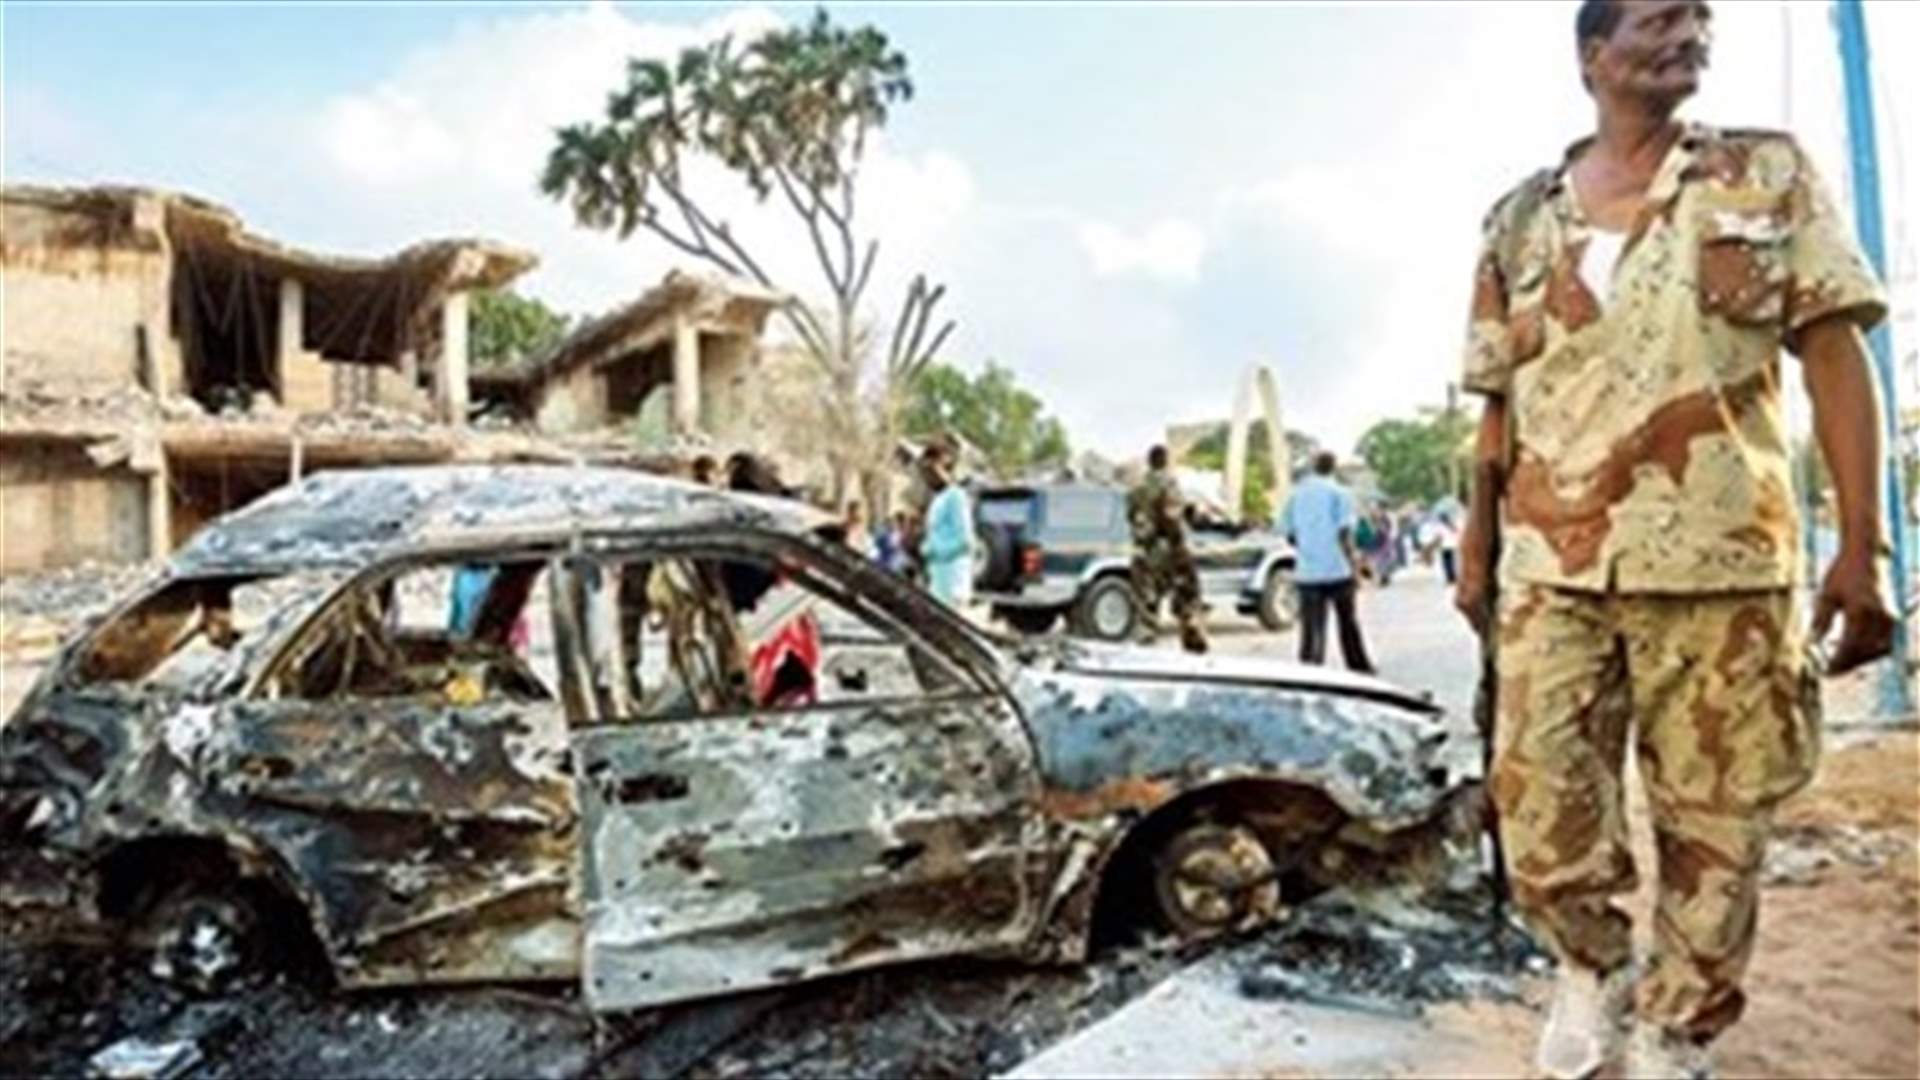 Death toll from Shabaab attack on Mogadishu hotels rises to 22 - police